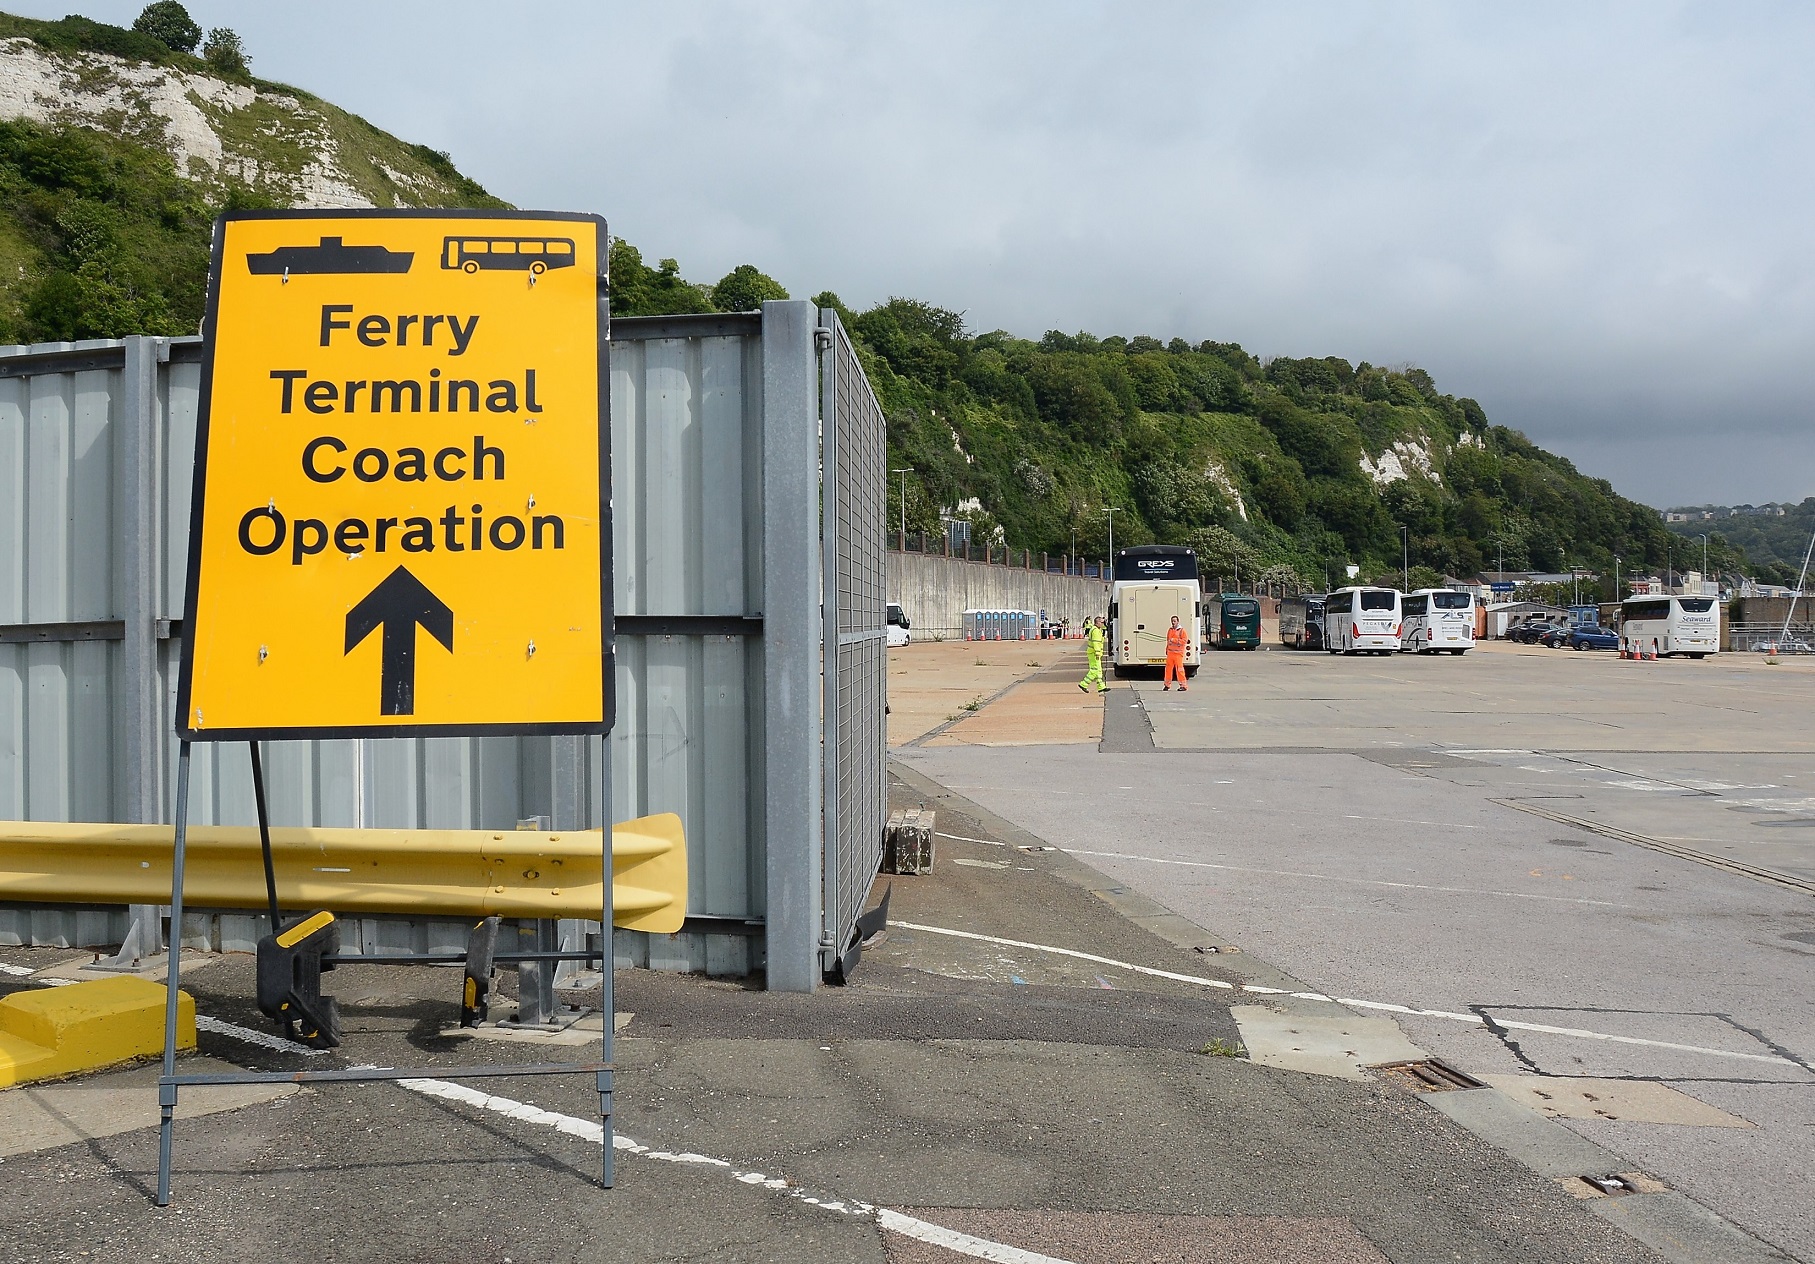 Coach parking bays at the Port of Dover to be removed